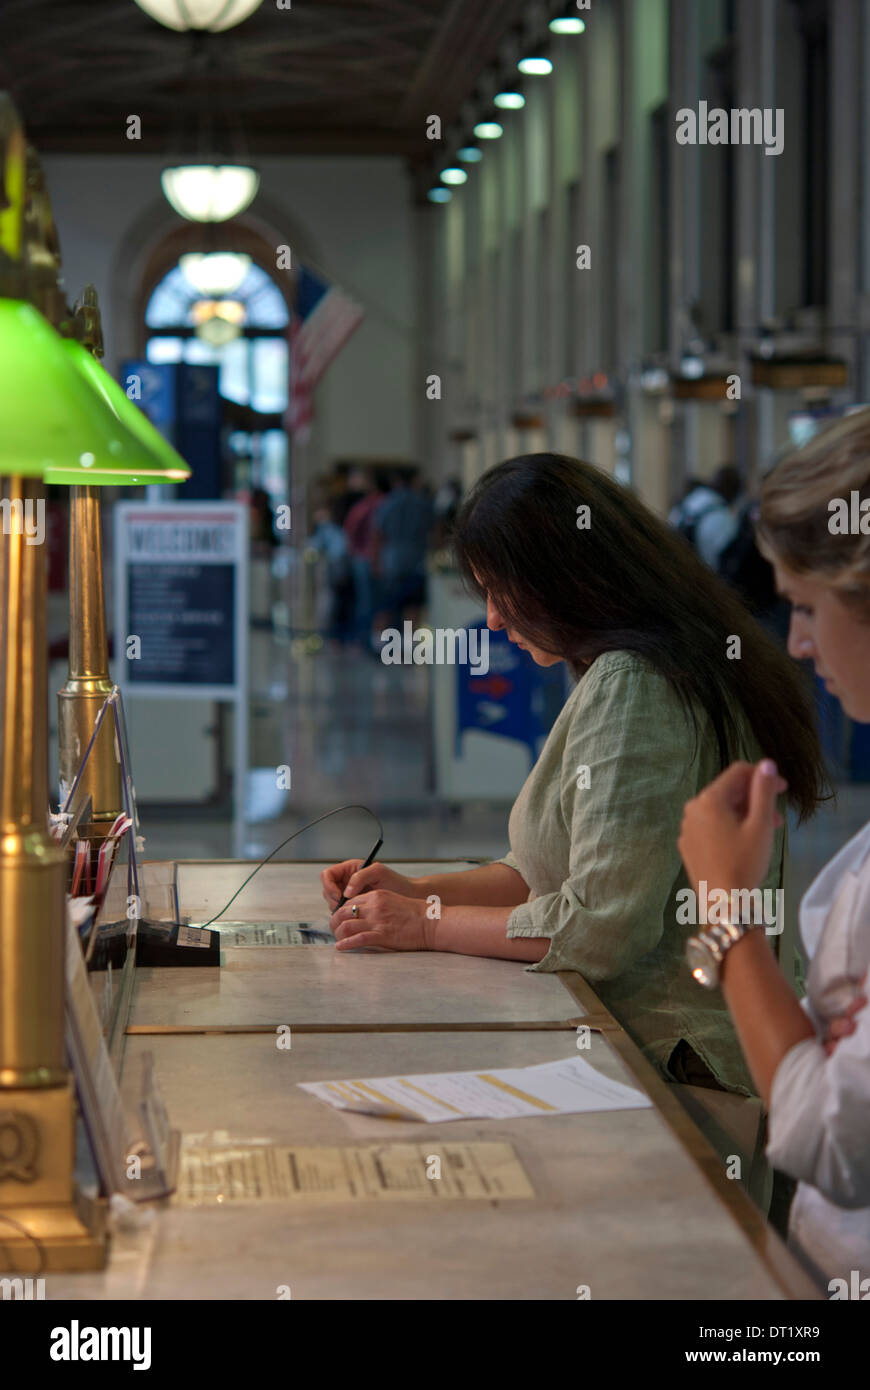 Woman filling in forms at New York post office Stock Photo